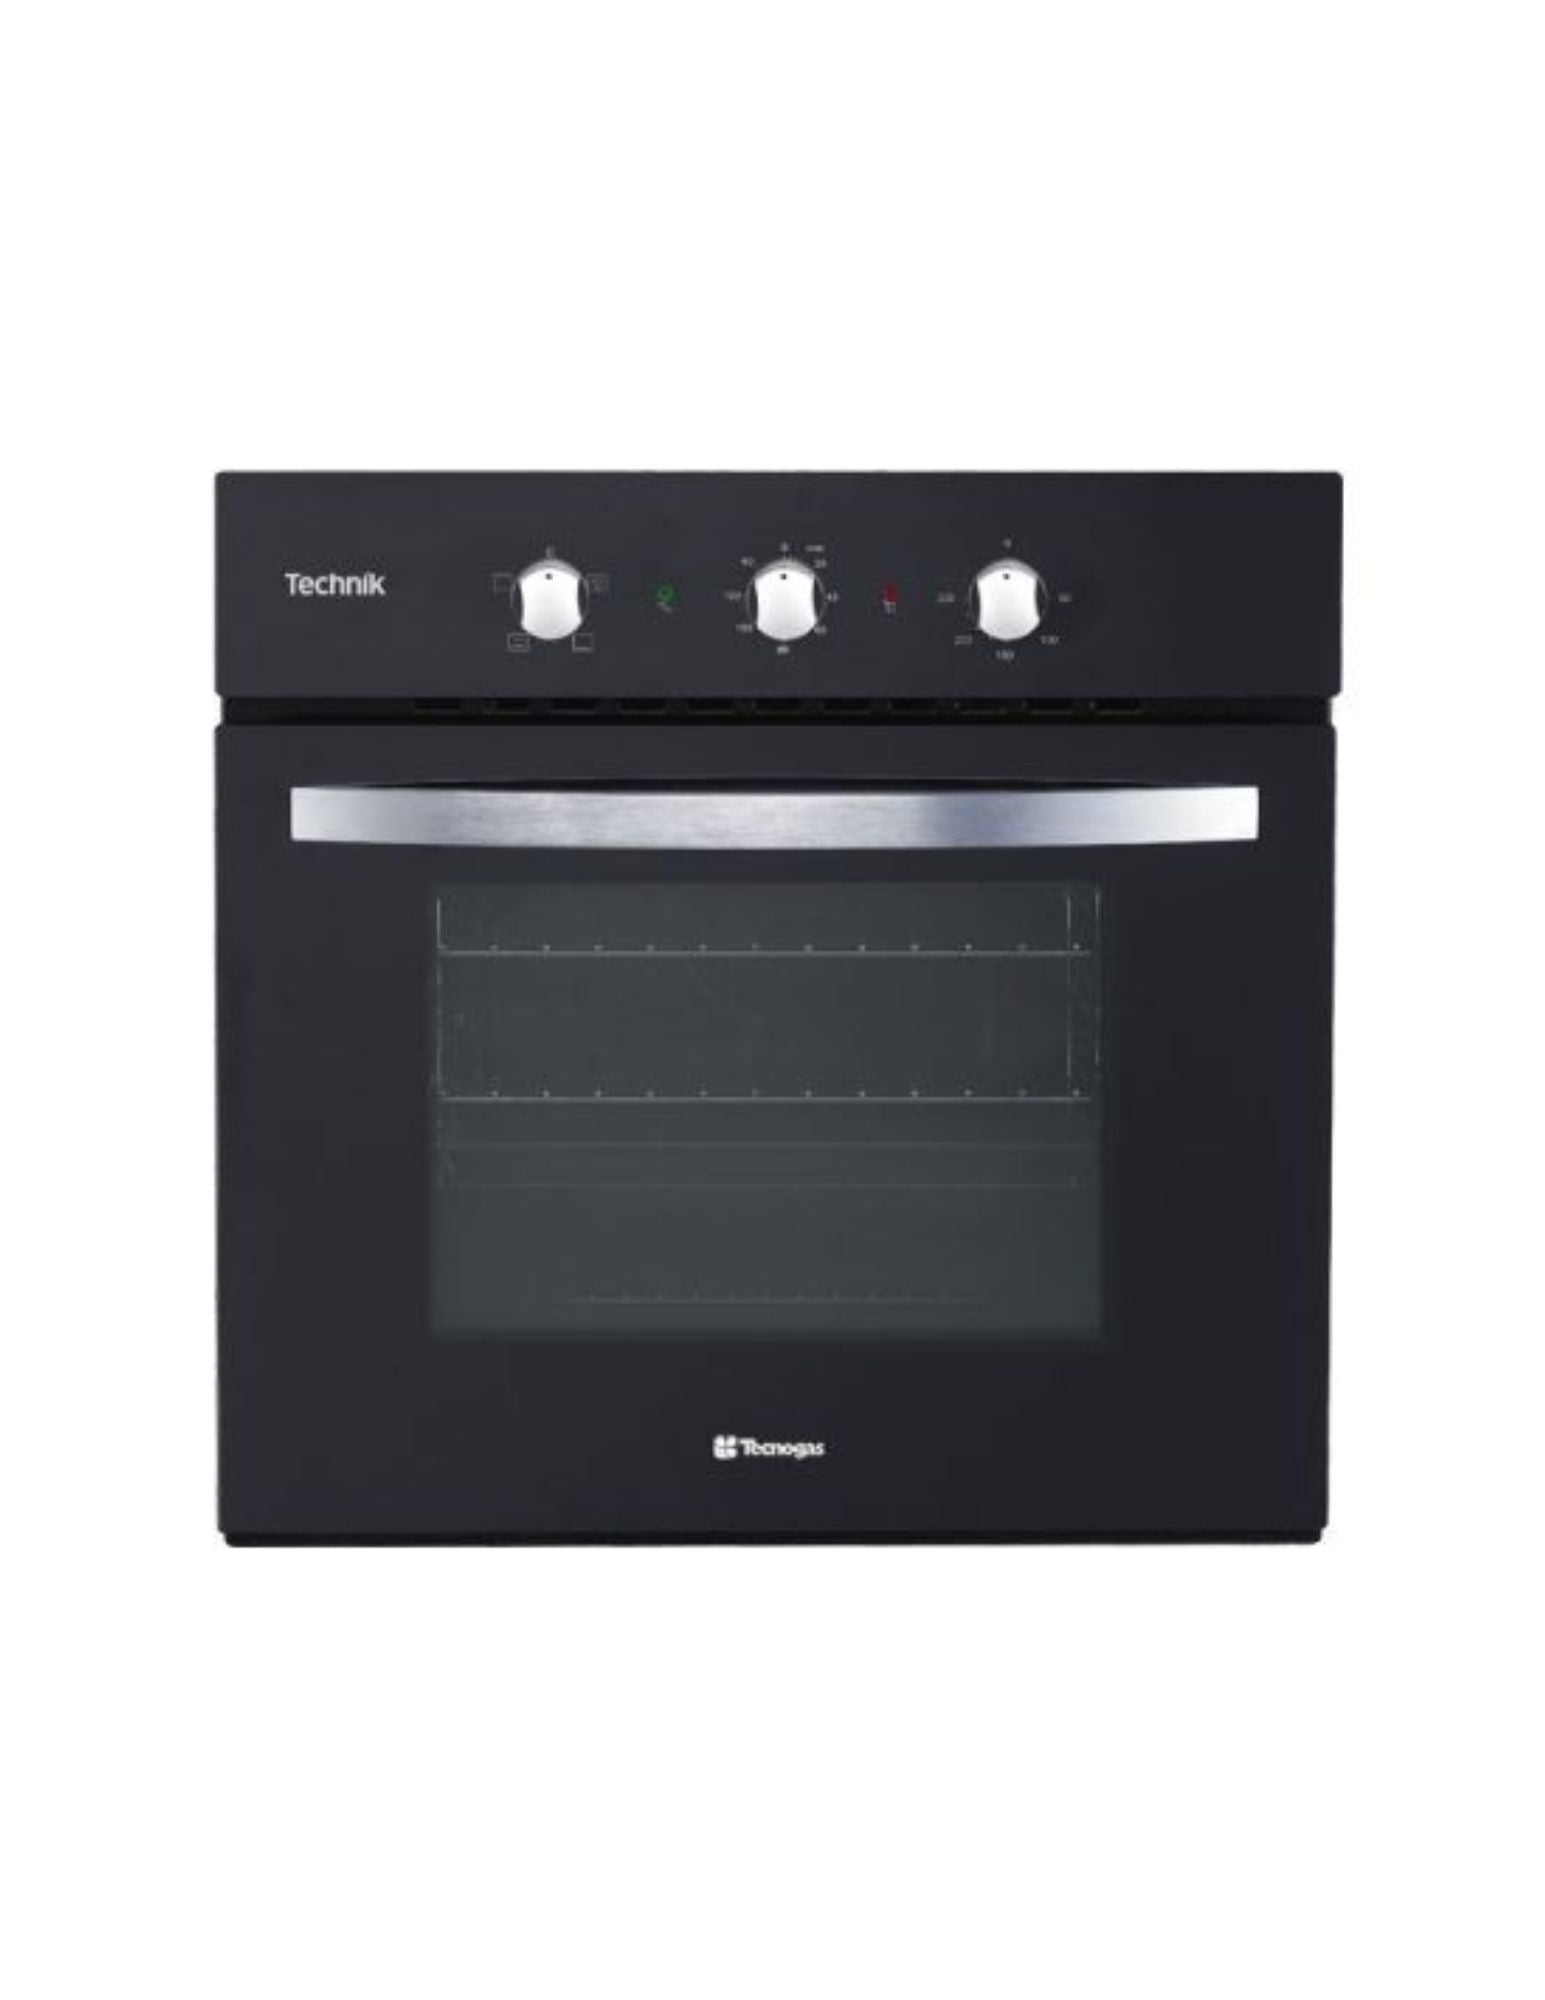 TECNOGAS TEO6040BL2 Built in Electric Oven TecnoGas